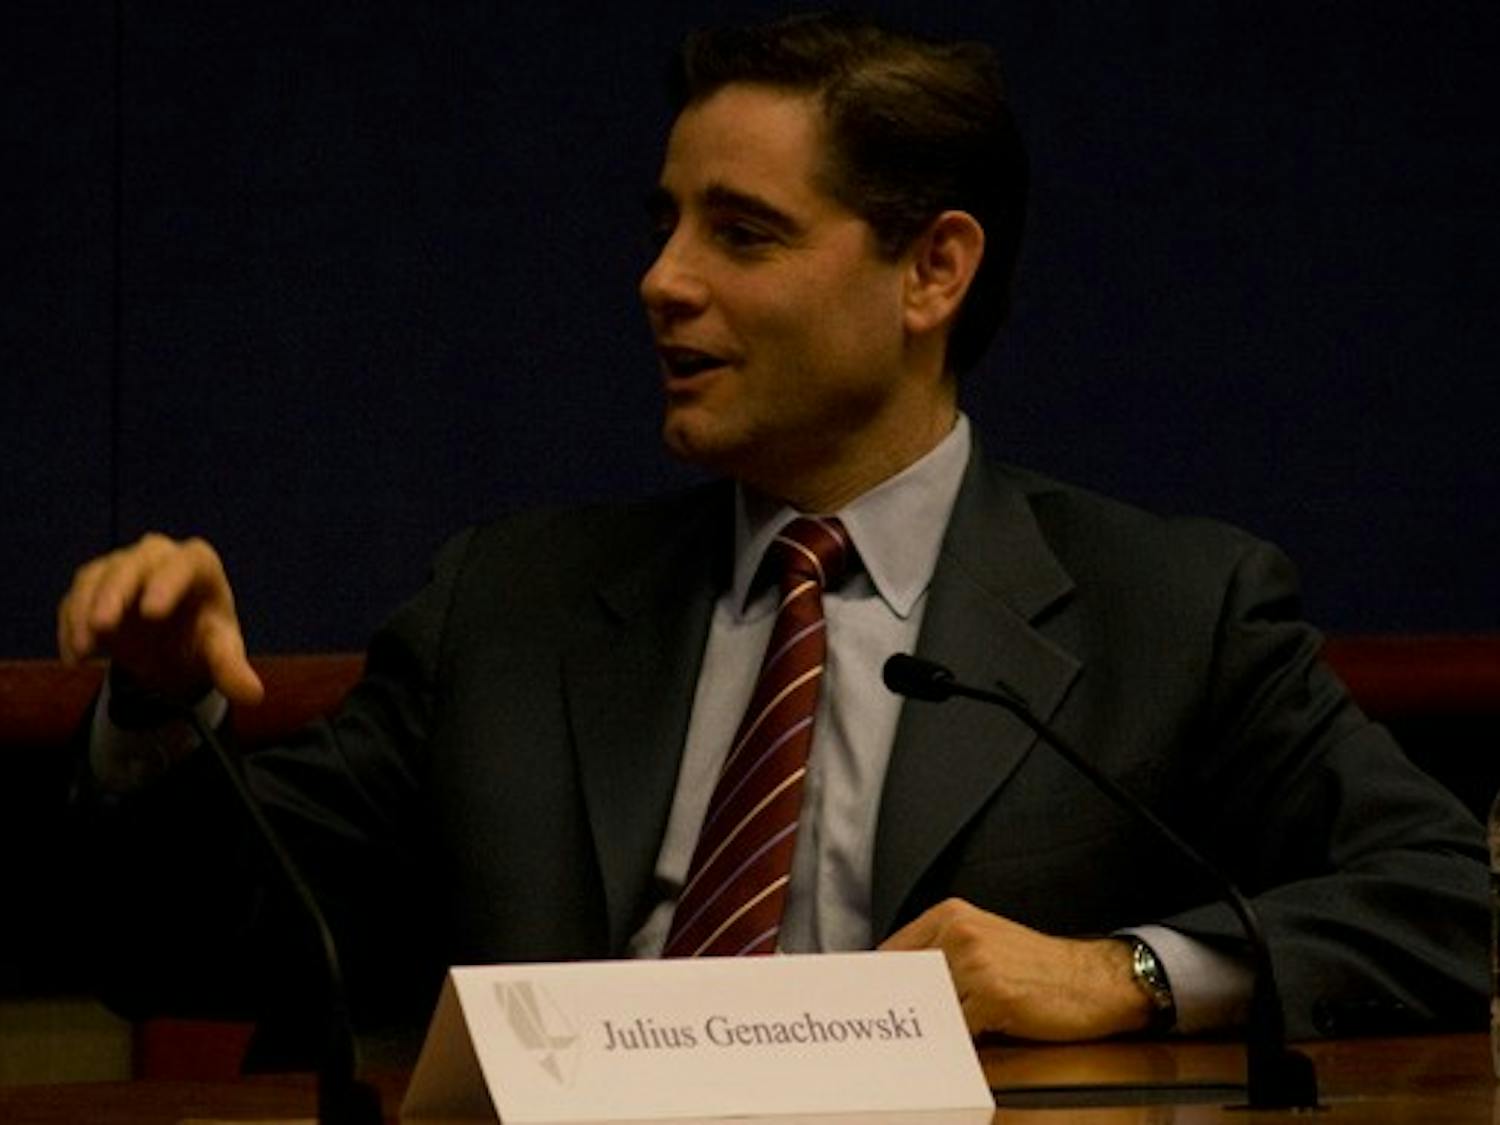 Julius Genachowski, chairman of the FCC, discussed necessary improvements in  broadband access for the U.S. to remain competitive in the 21st century.